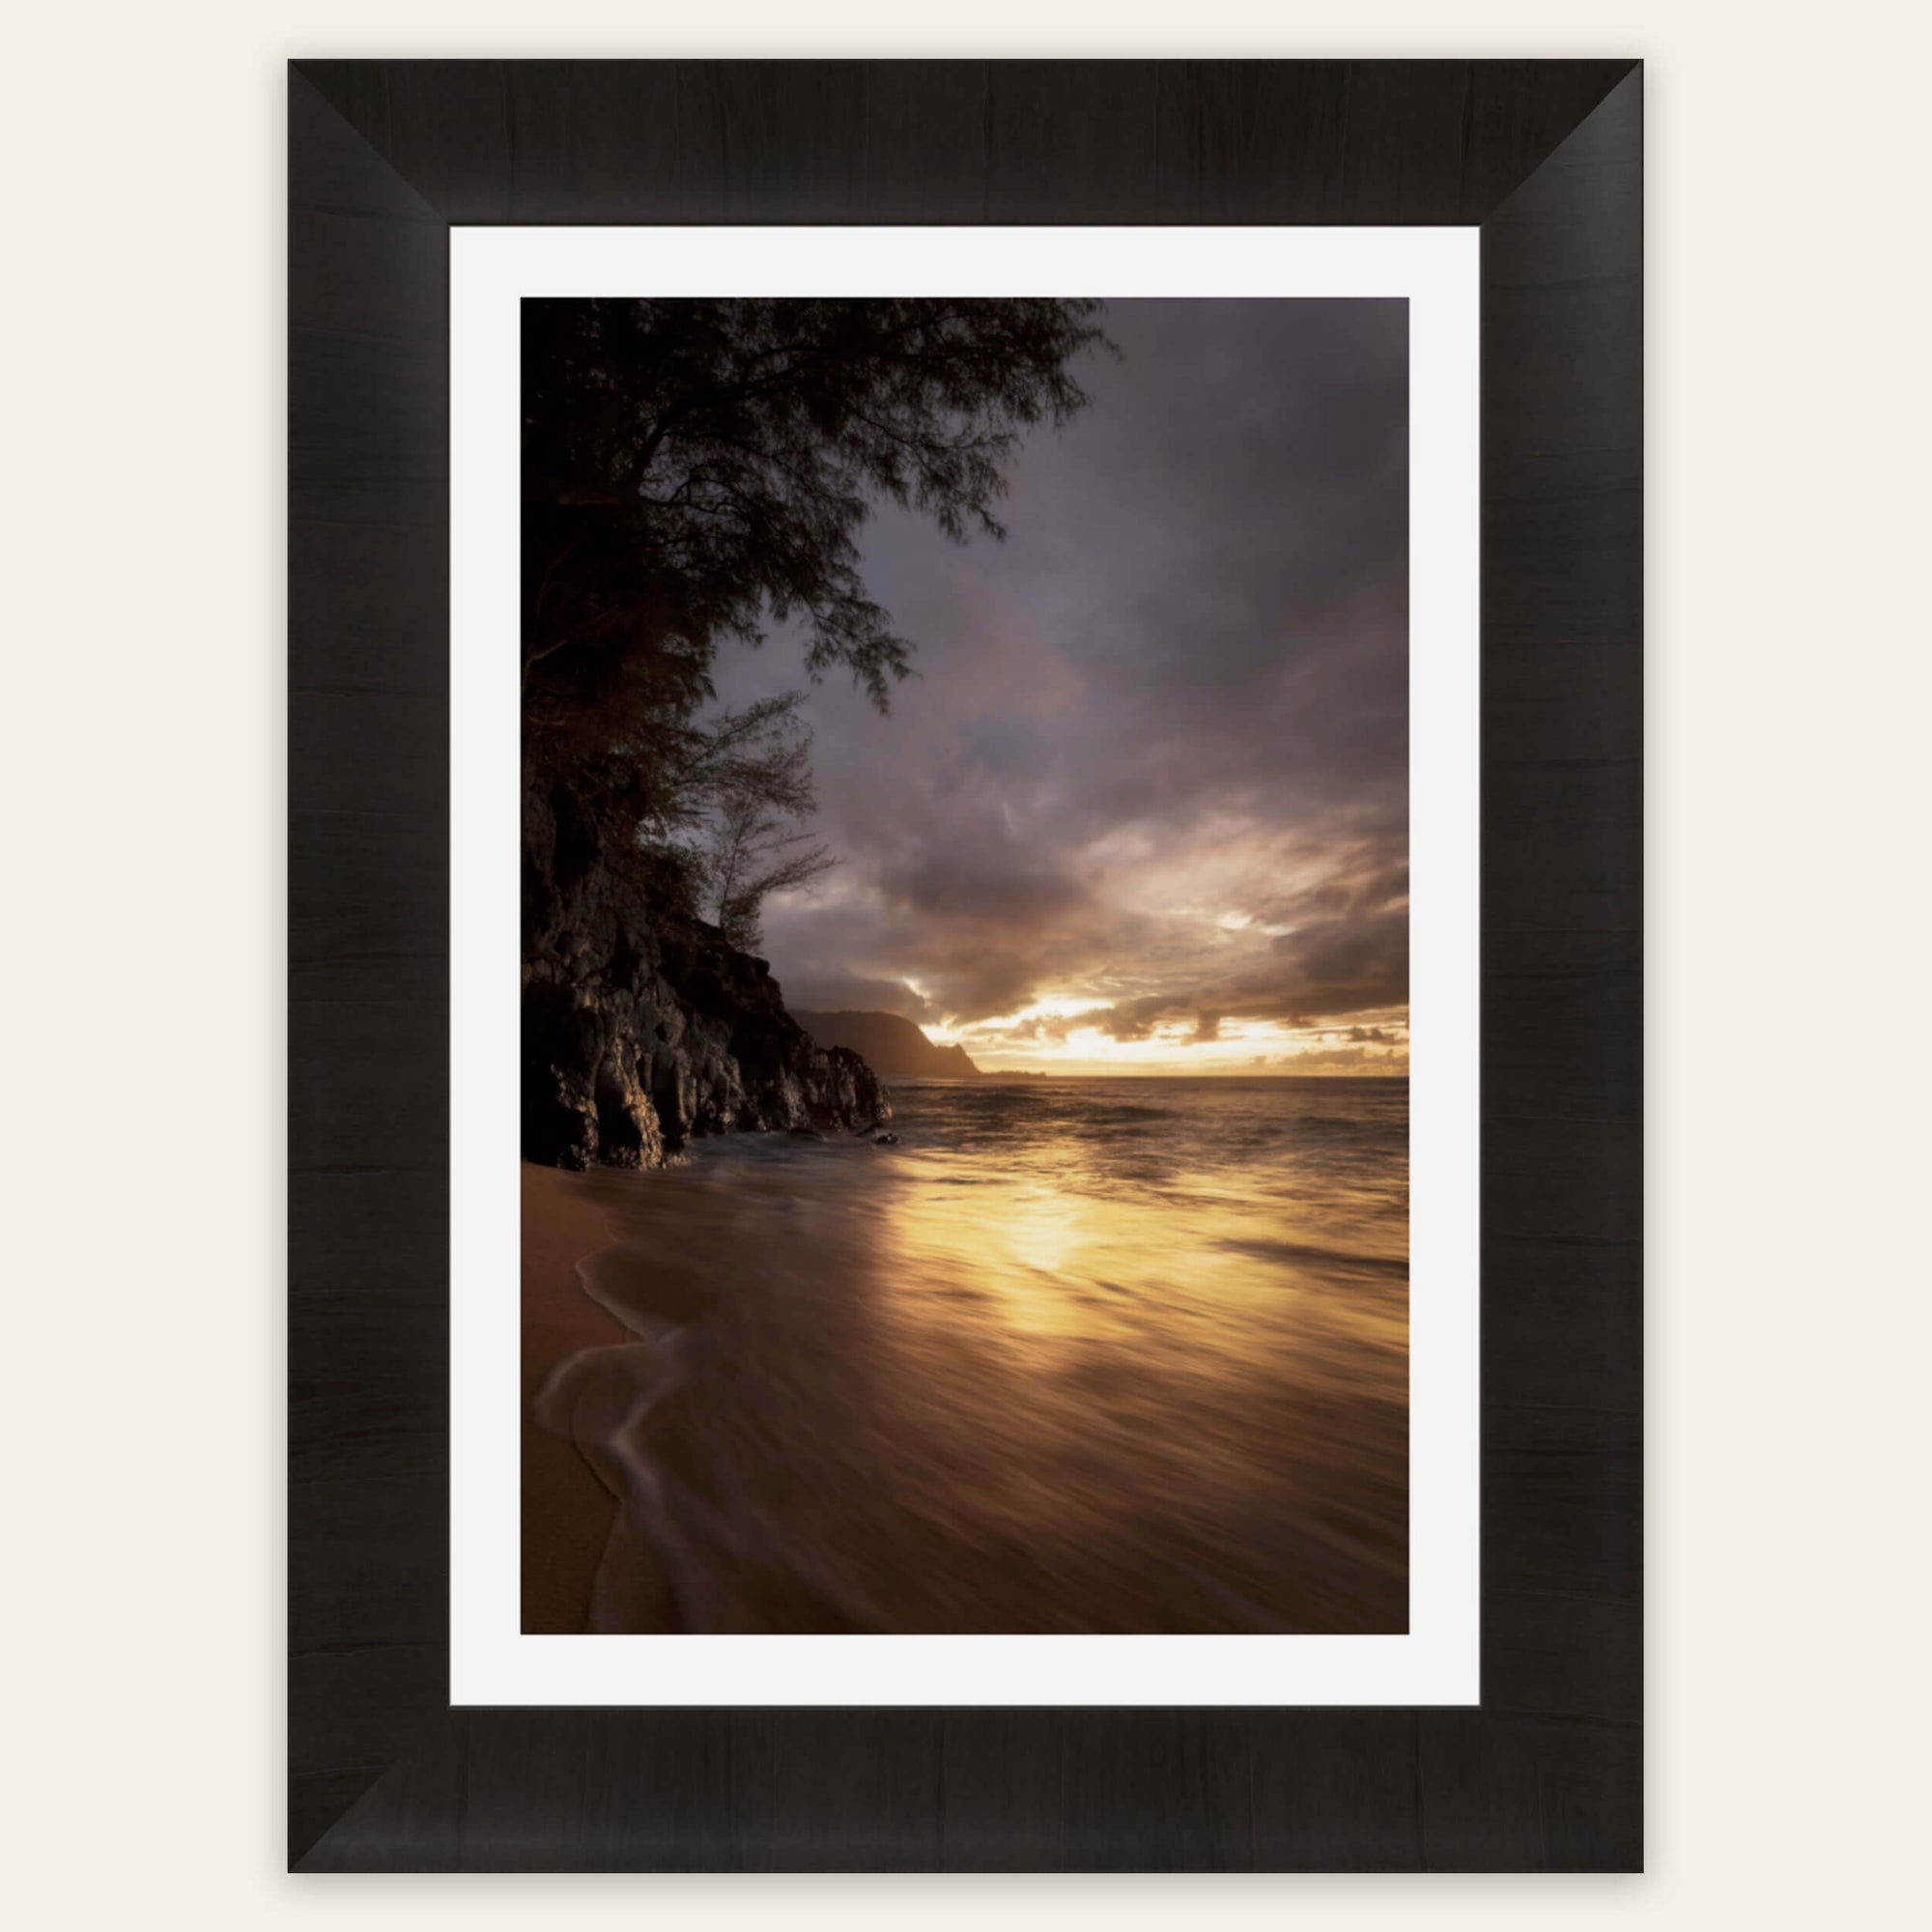 A framed sunset picture from Hideaway Beach in Princeville, Kauai.